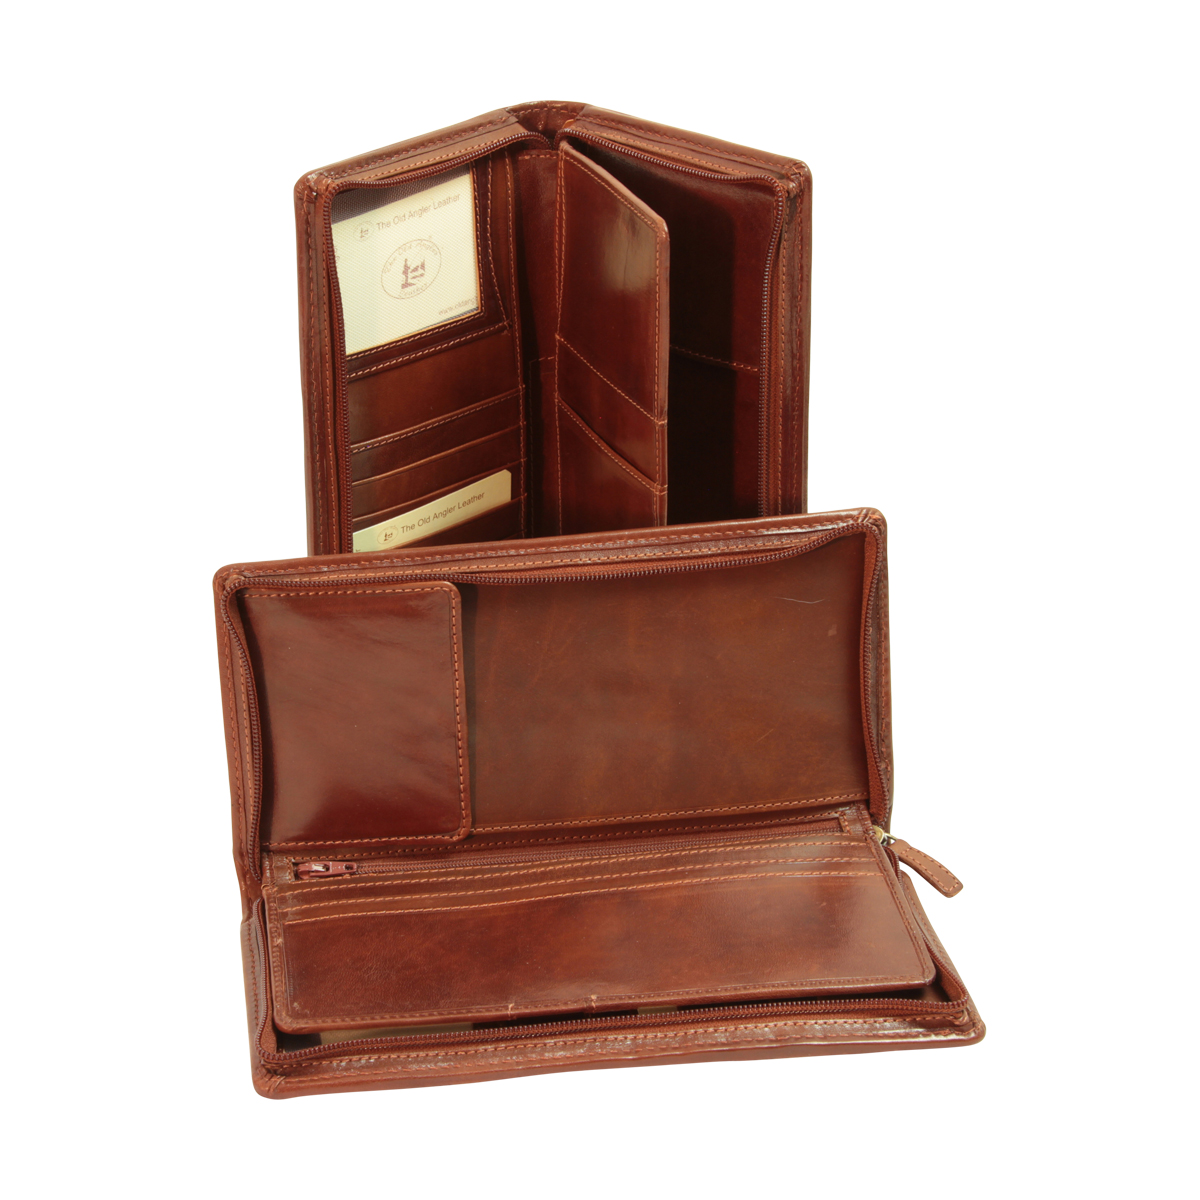 Leather travel wallet|506205MA|Old Angler Firenze